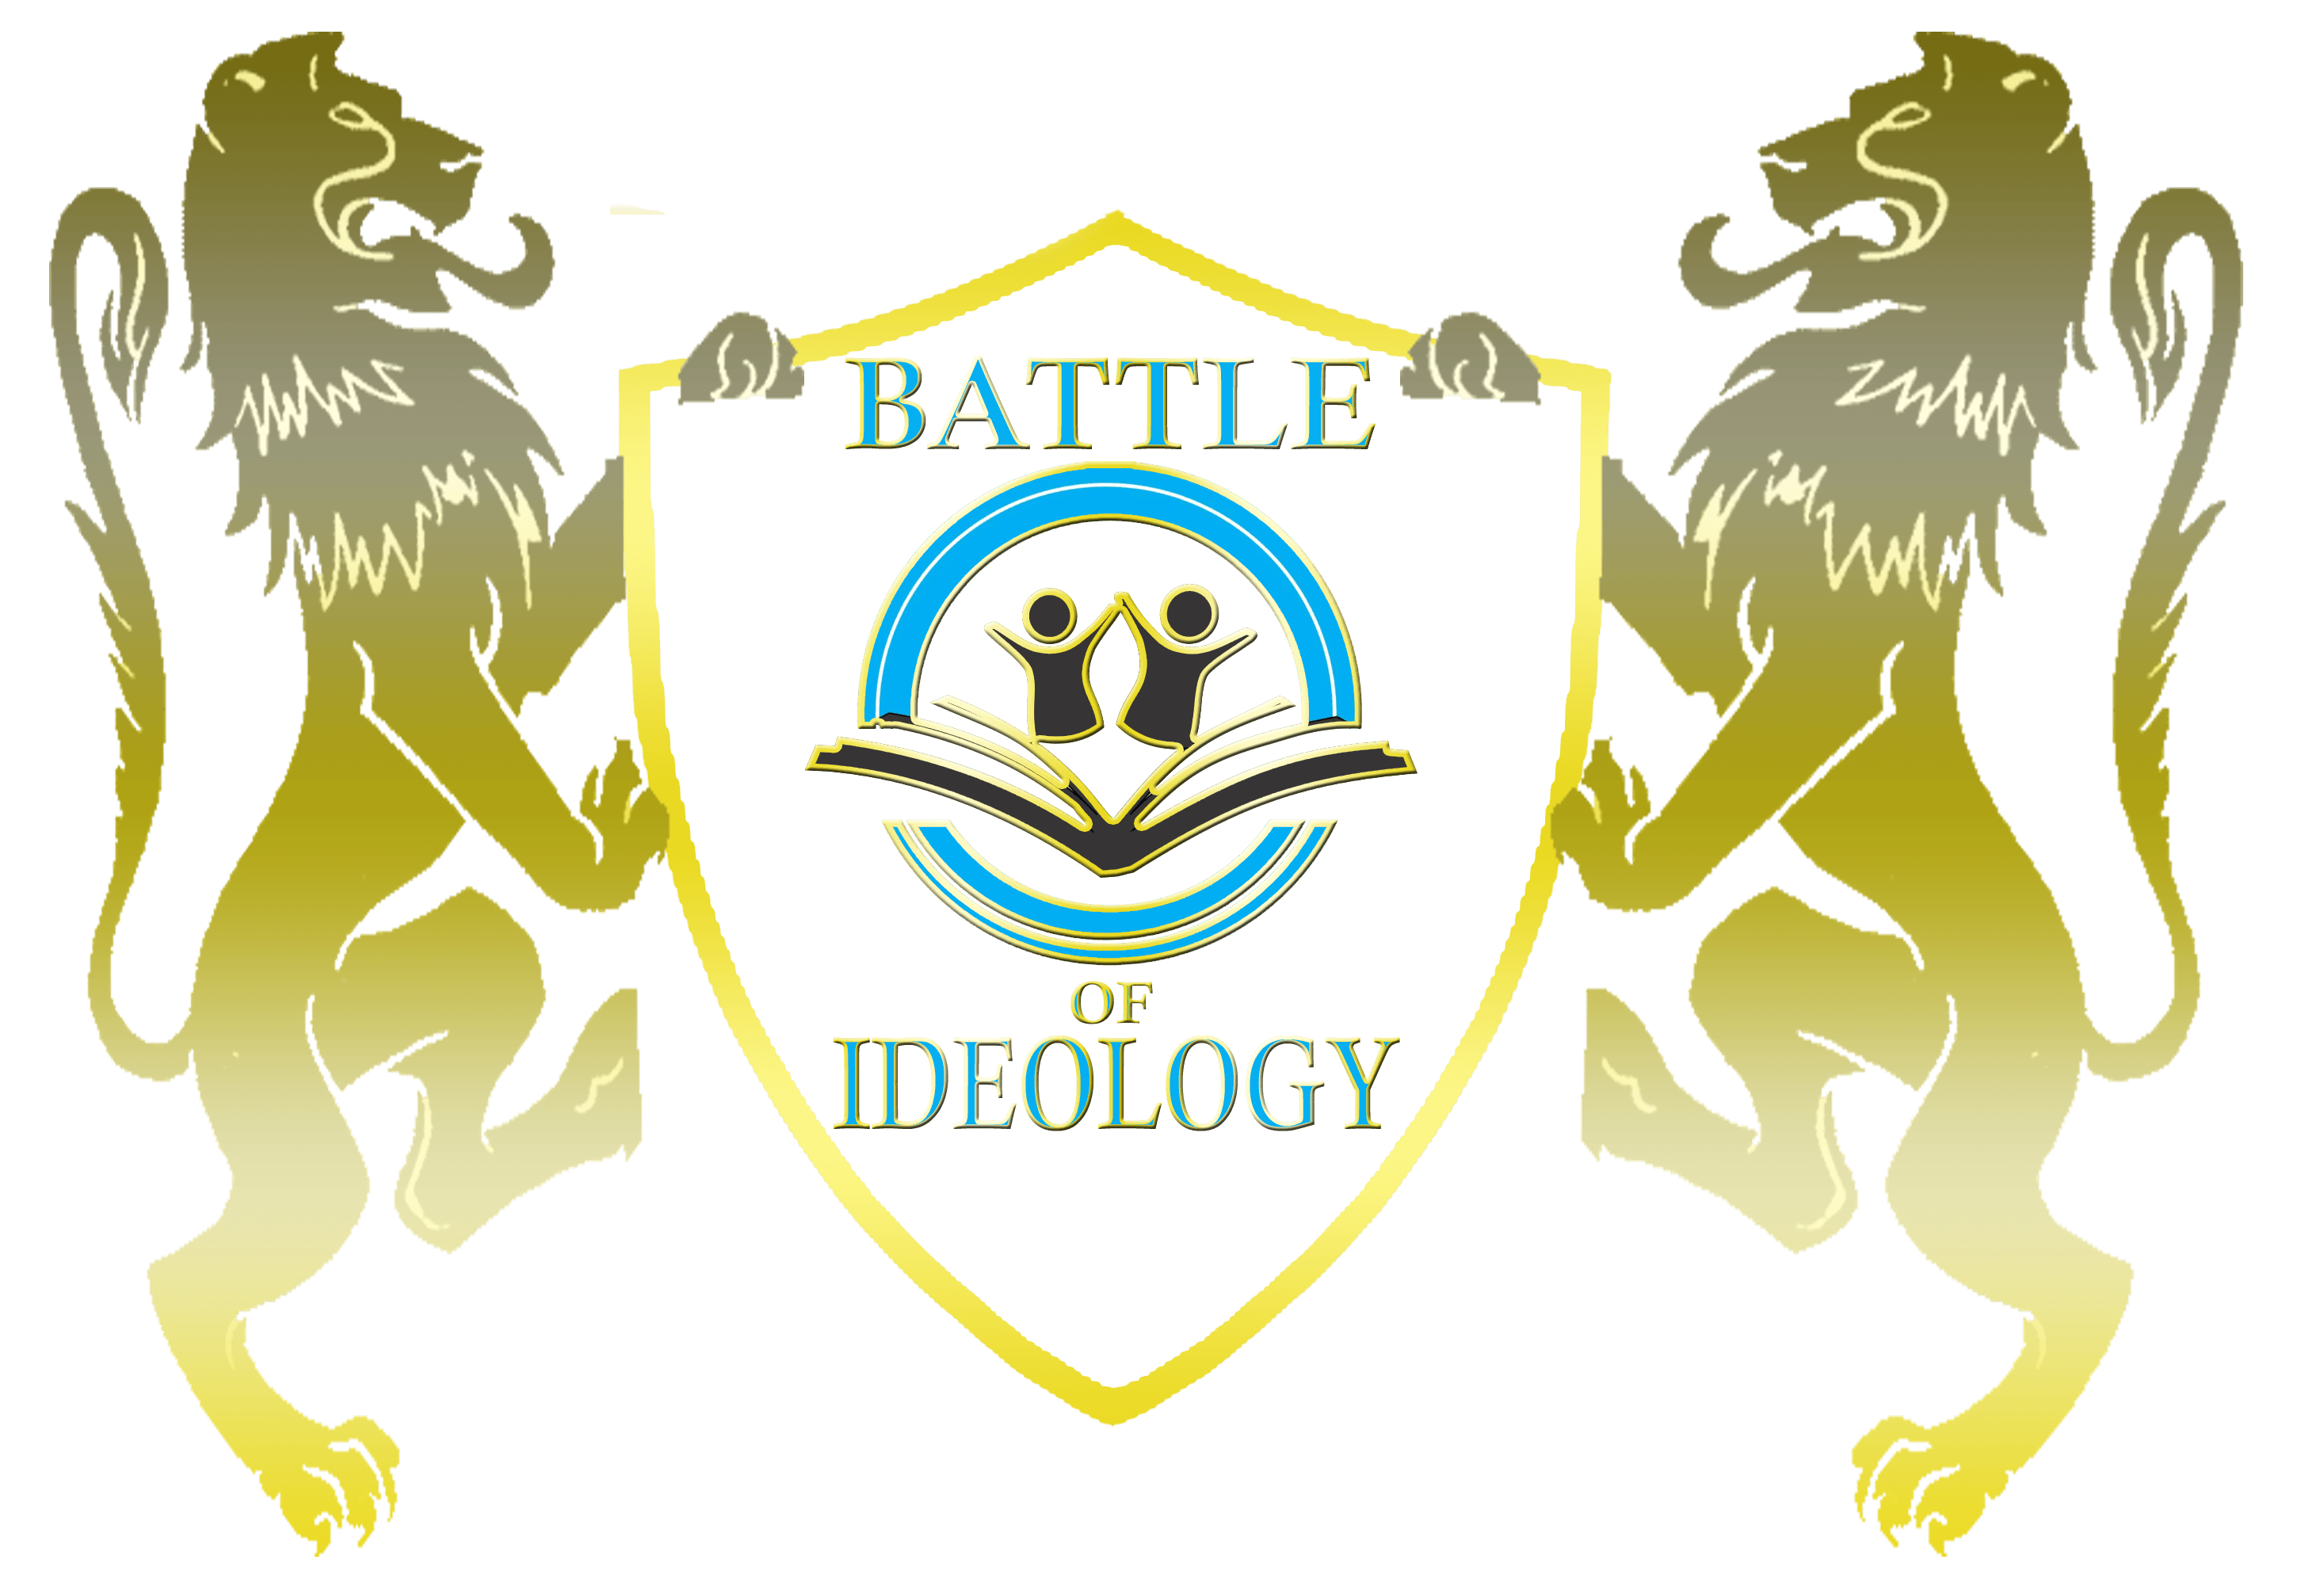 Ideology Logo - Learner's Movement of South Africa Battle of Ideology Logo